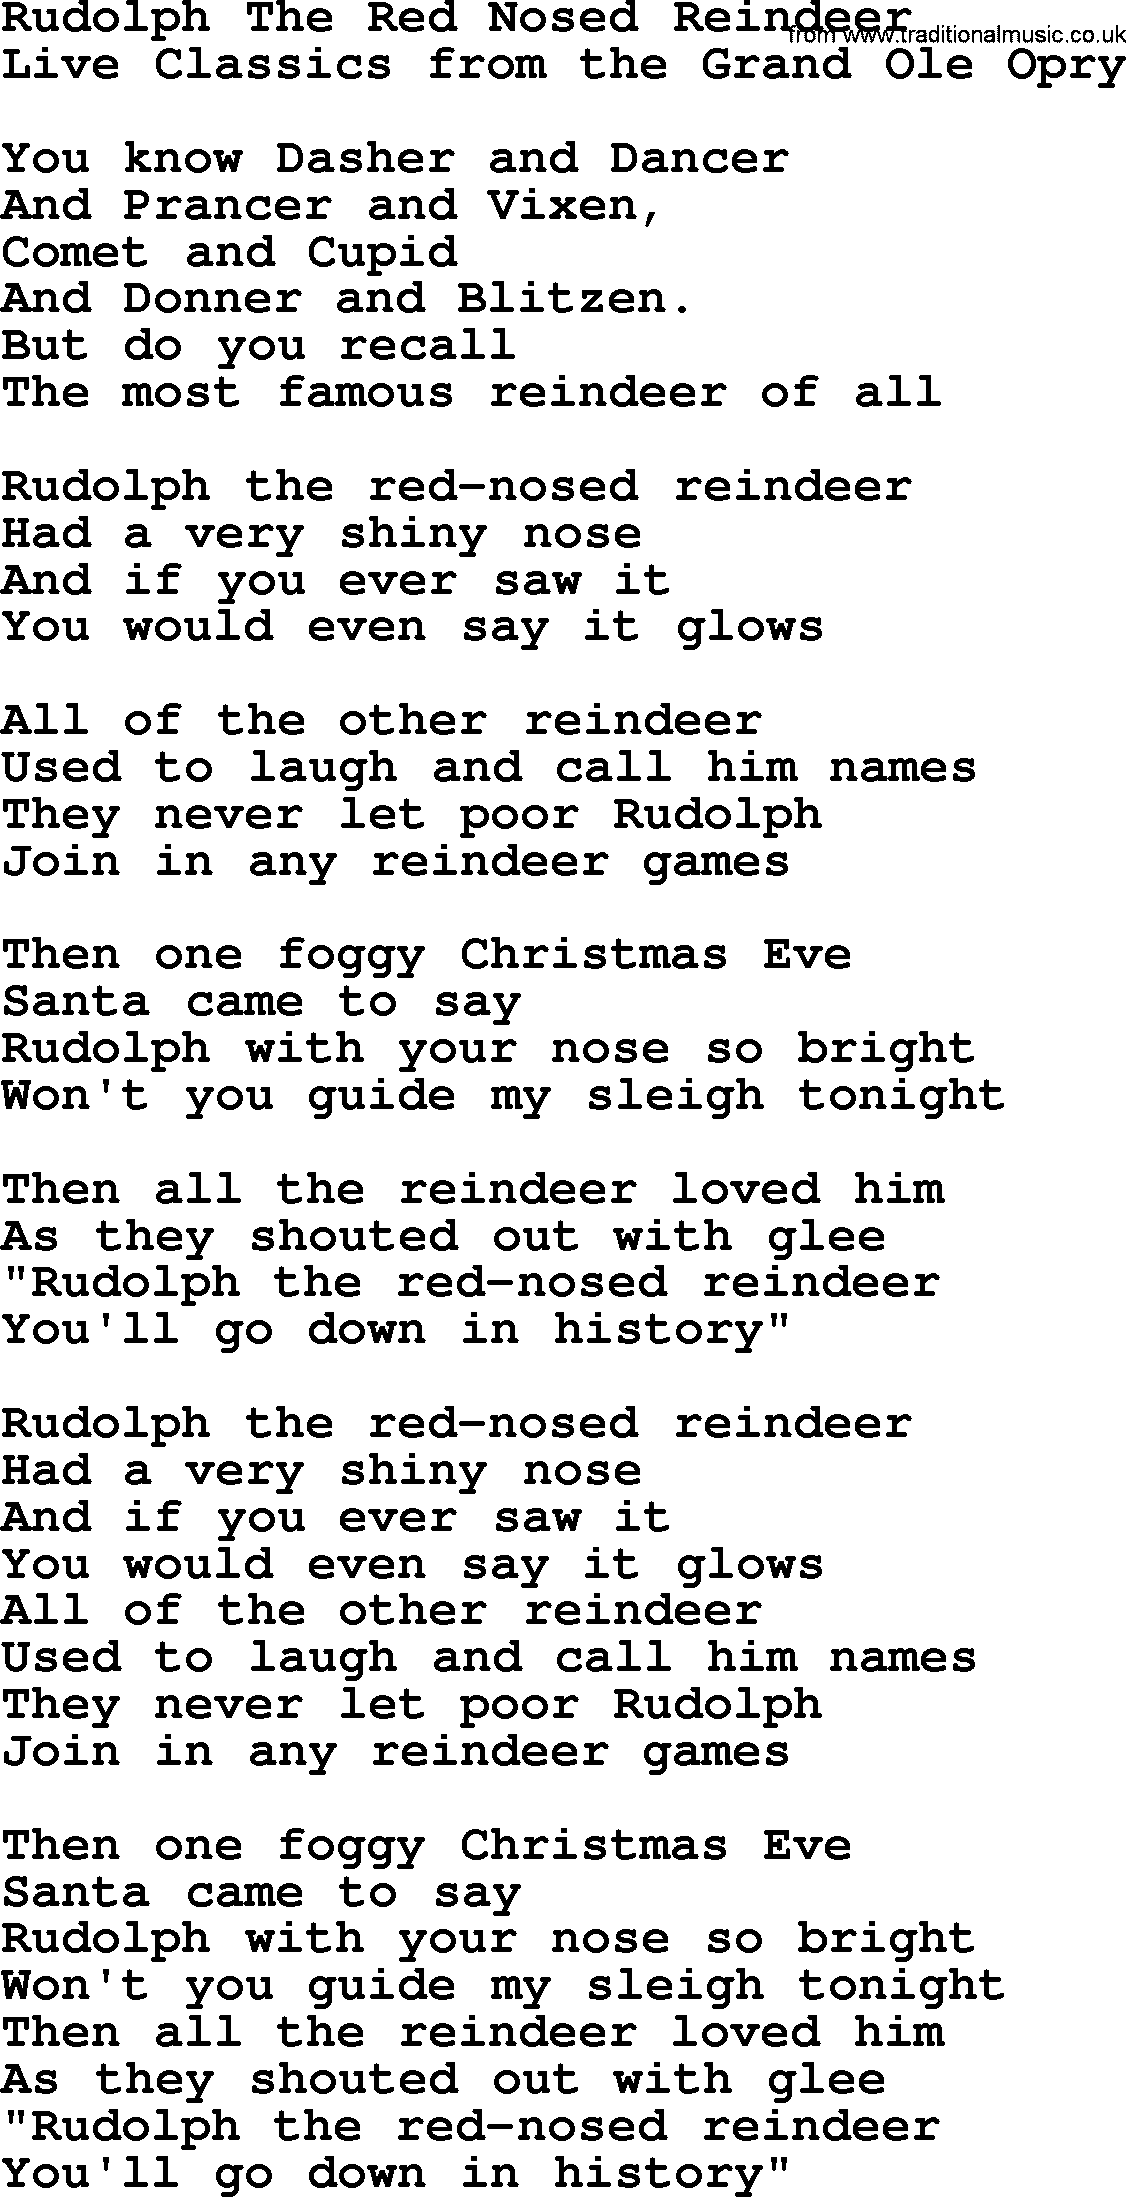 Marty Robbins song: Rudolph The Red Nosed Reindeer, lyrics